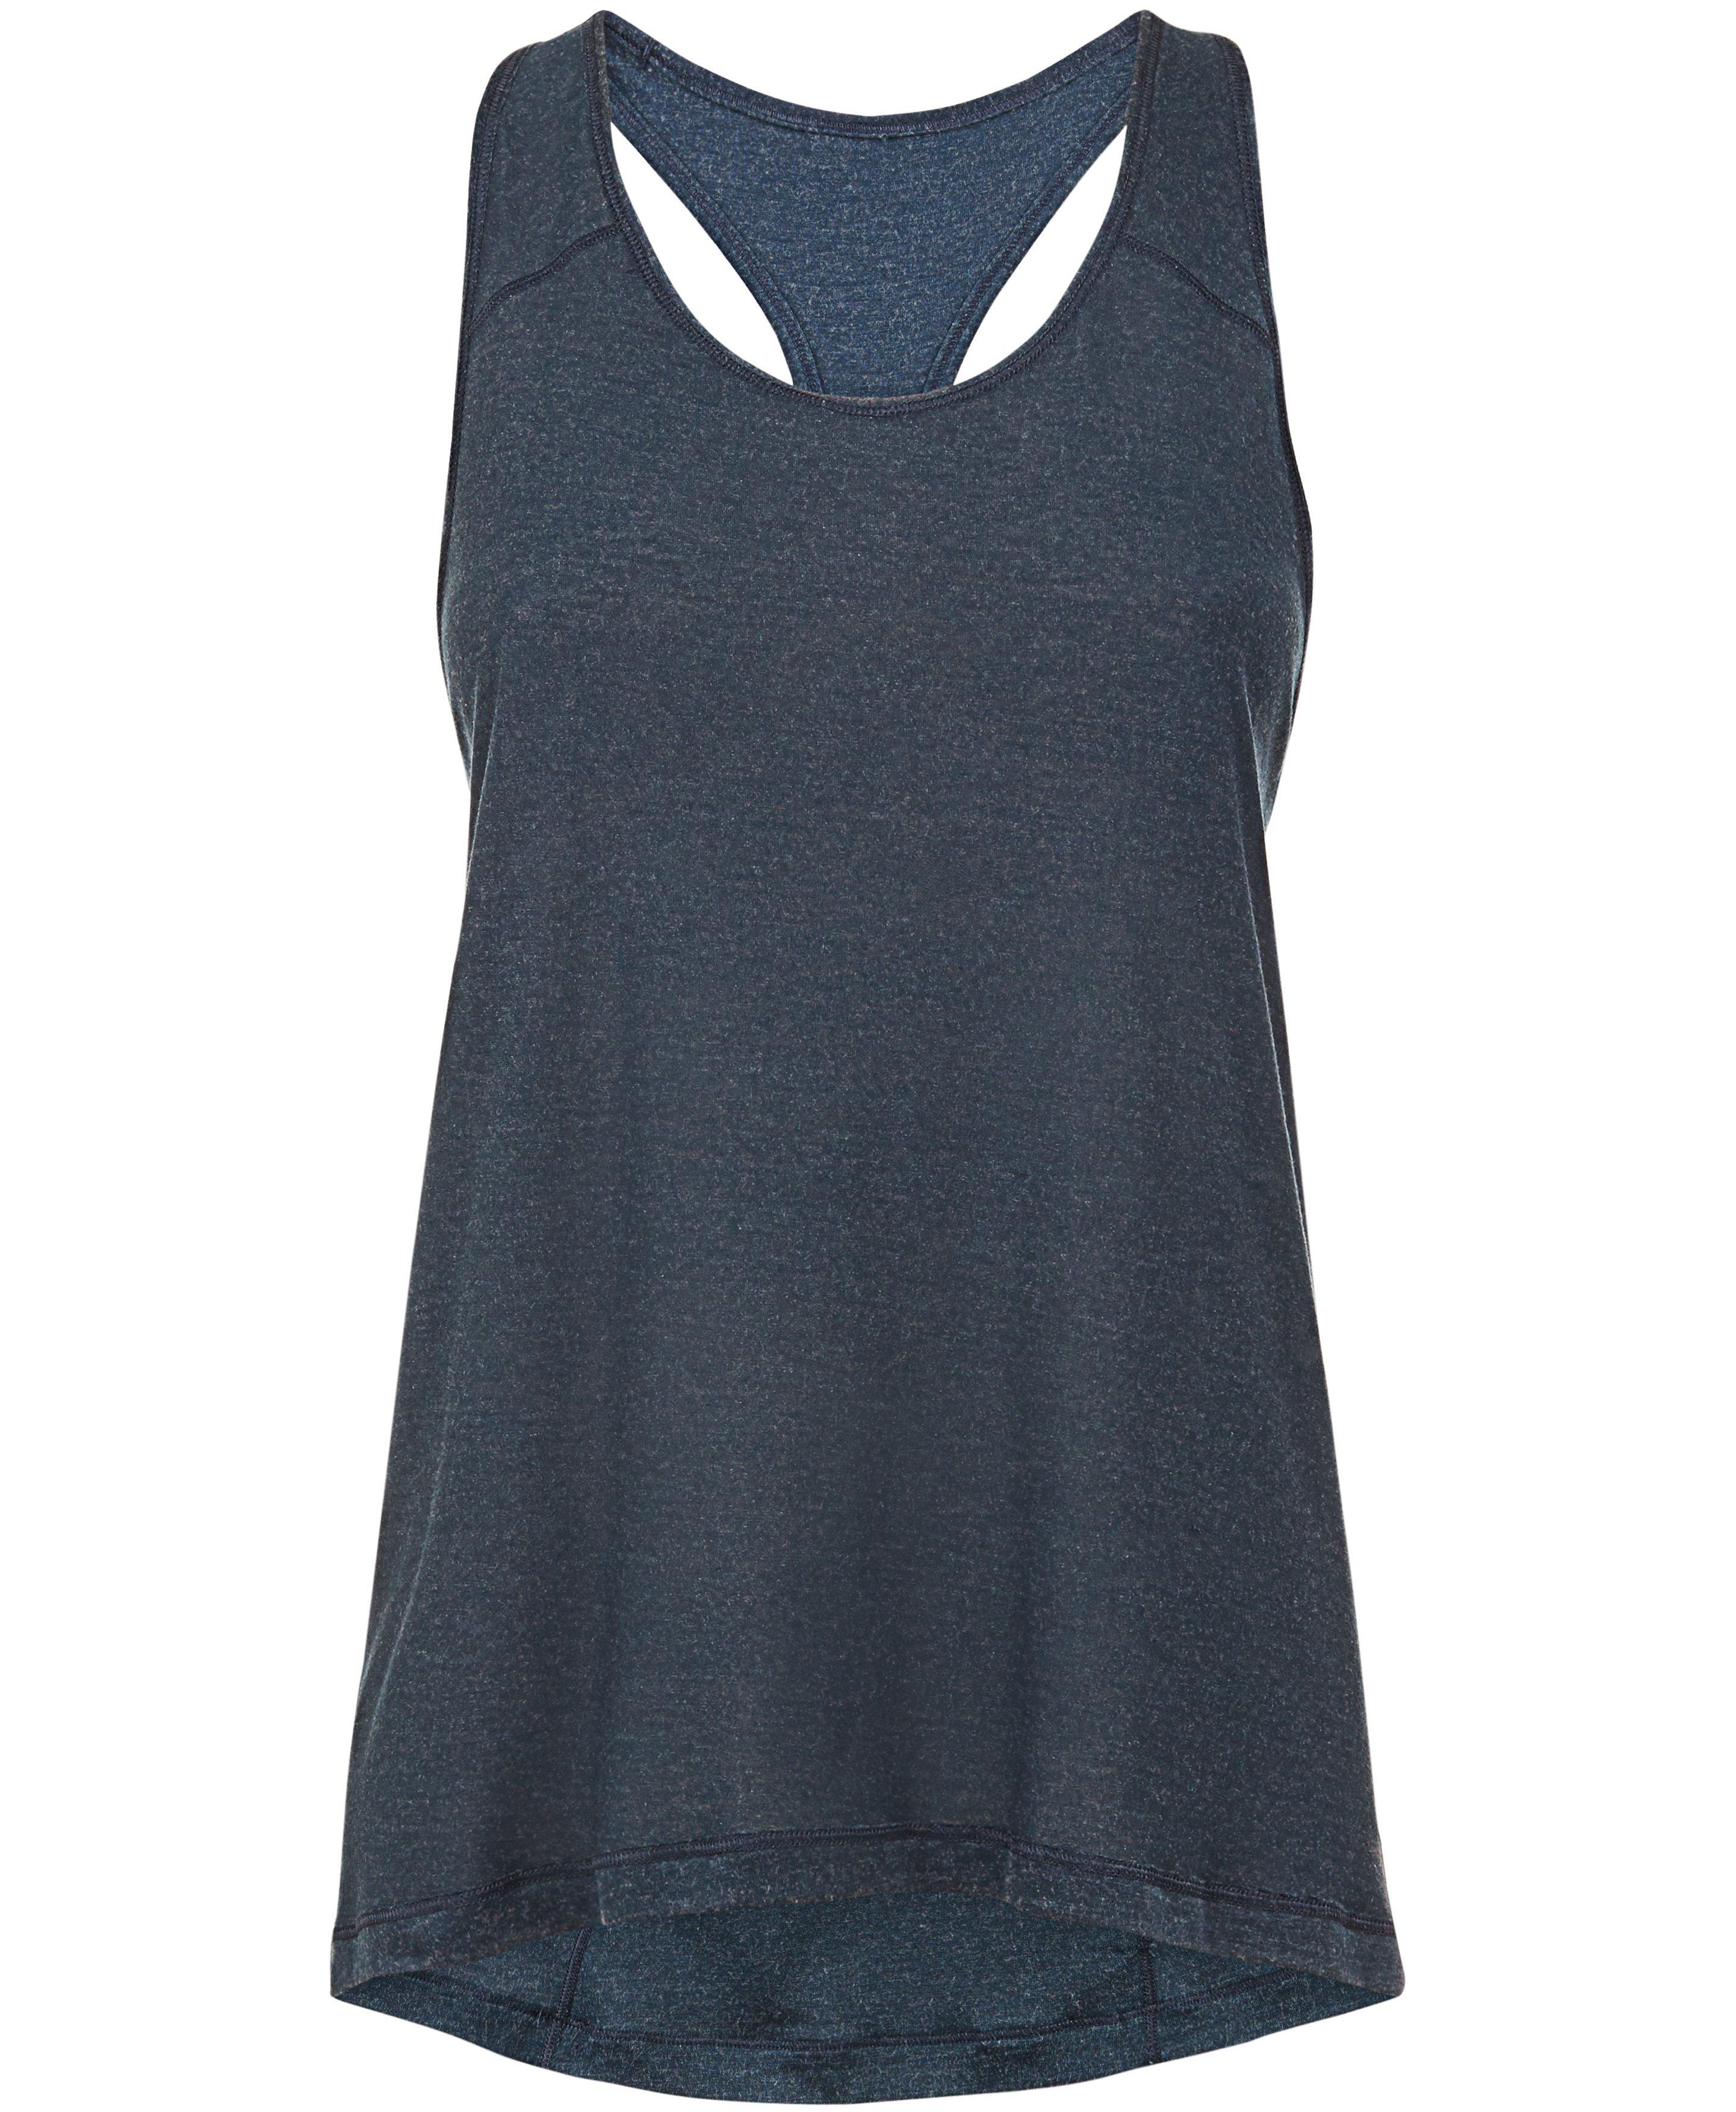 Ideal for layering this is more than just your average workout tank. In super soft jersey, stay cool and comfortable through every workout.